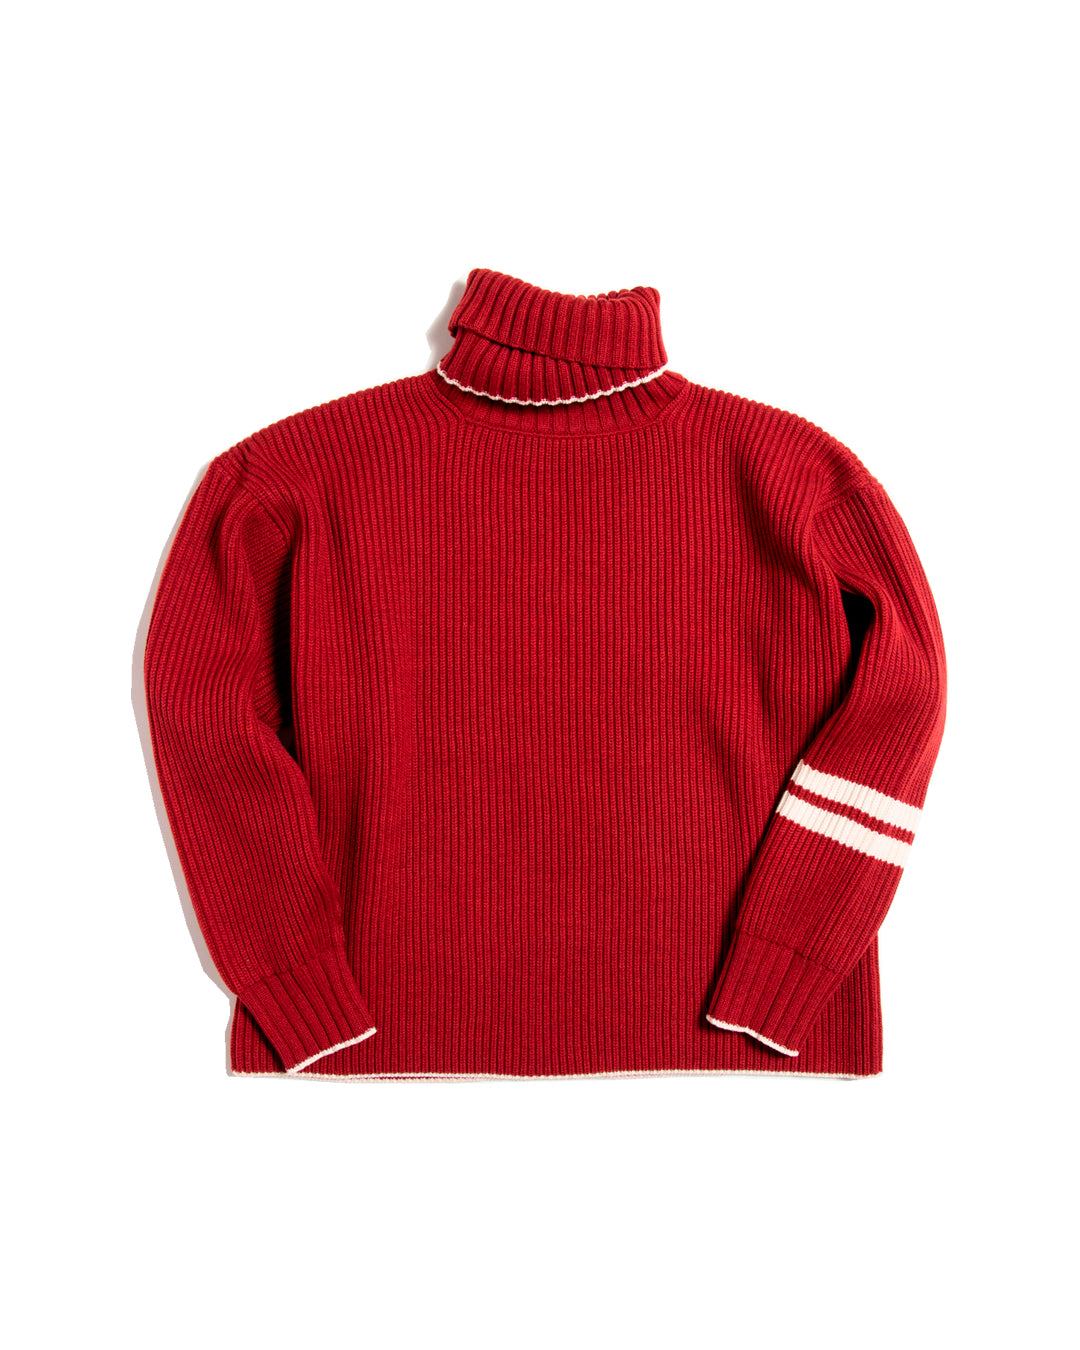 ROLL NECK WOOL & CASHMERE SWEATER (IVY RED) - Baby's all right